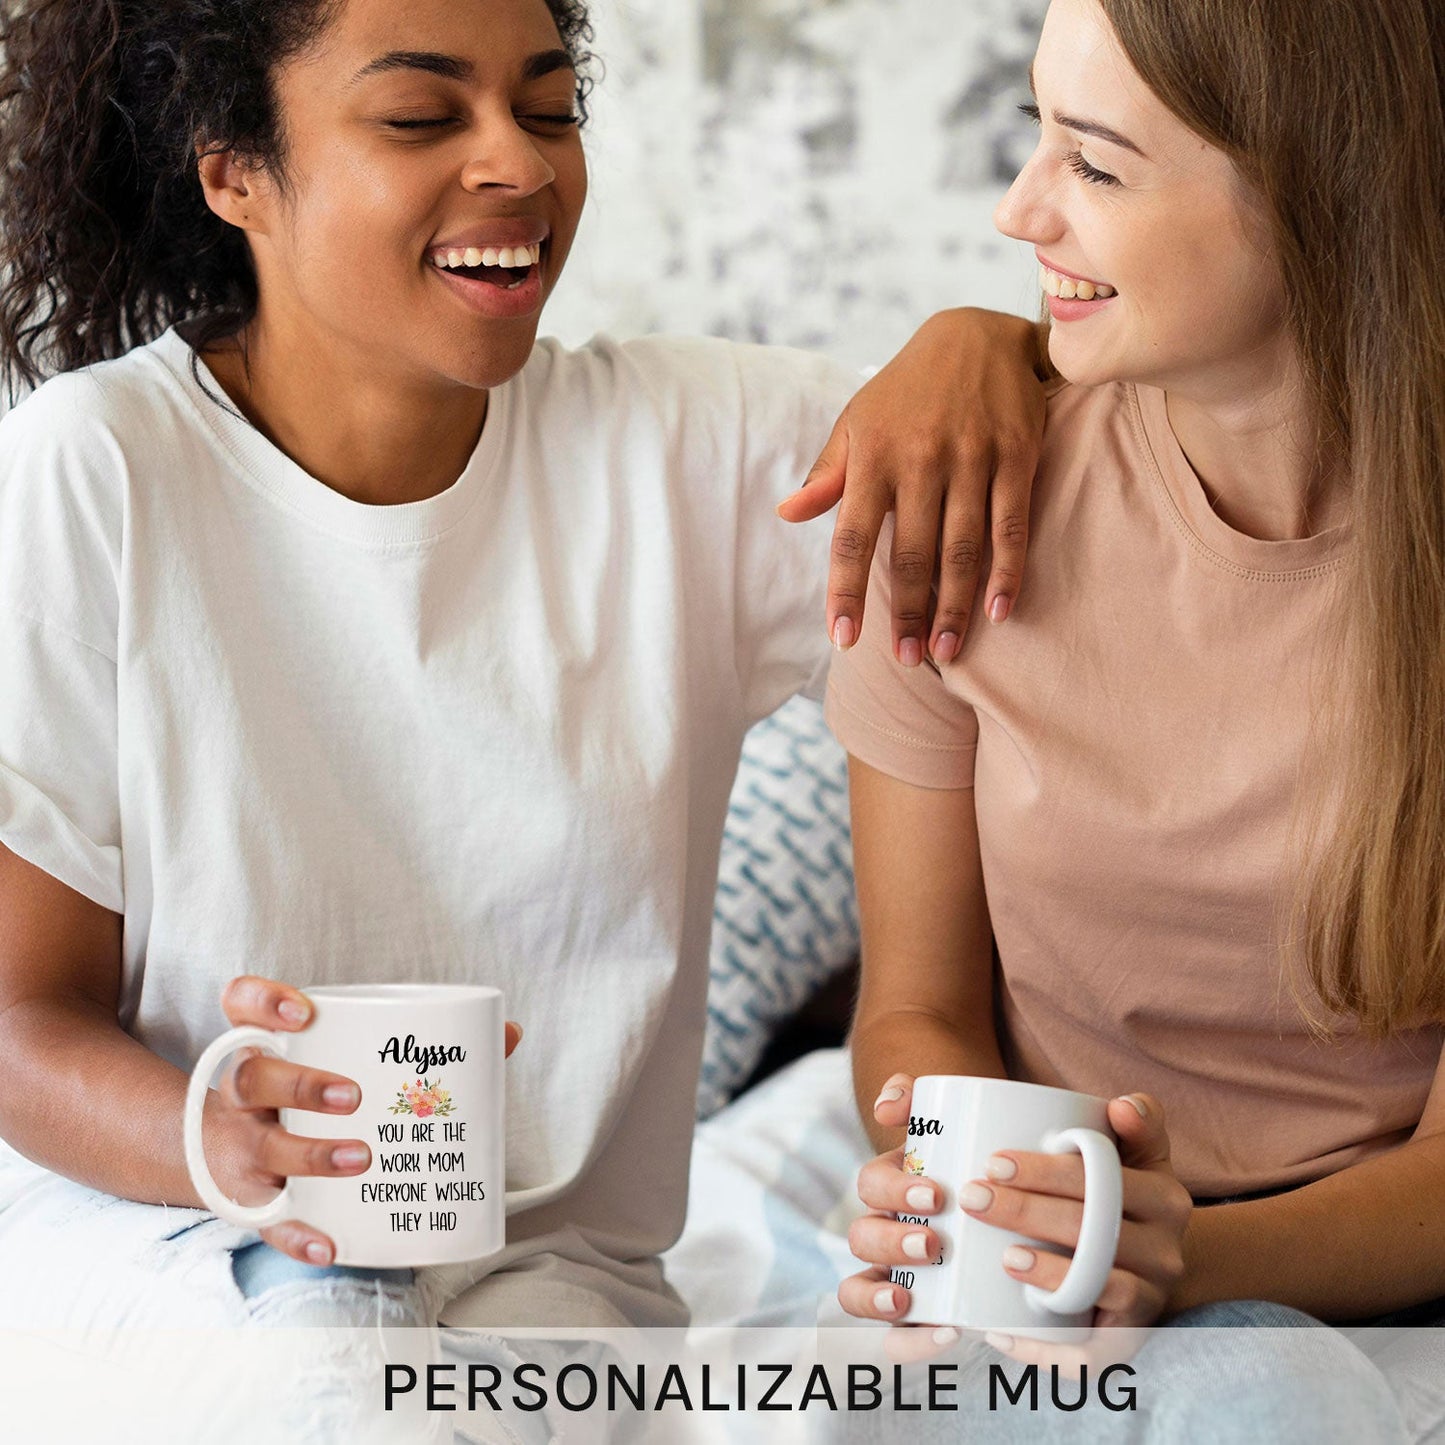 You Are The Work Mom Everyone Wishes They Had - Personalized  gift For Work Mom - Custom Mug - MyMindfulGifts